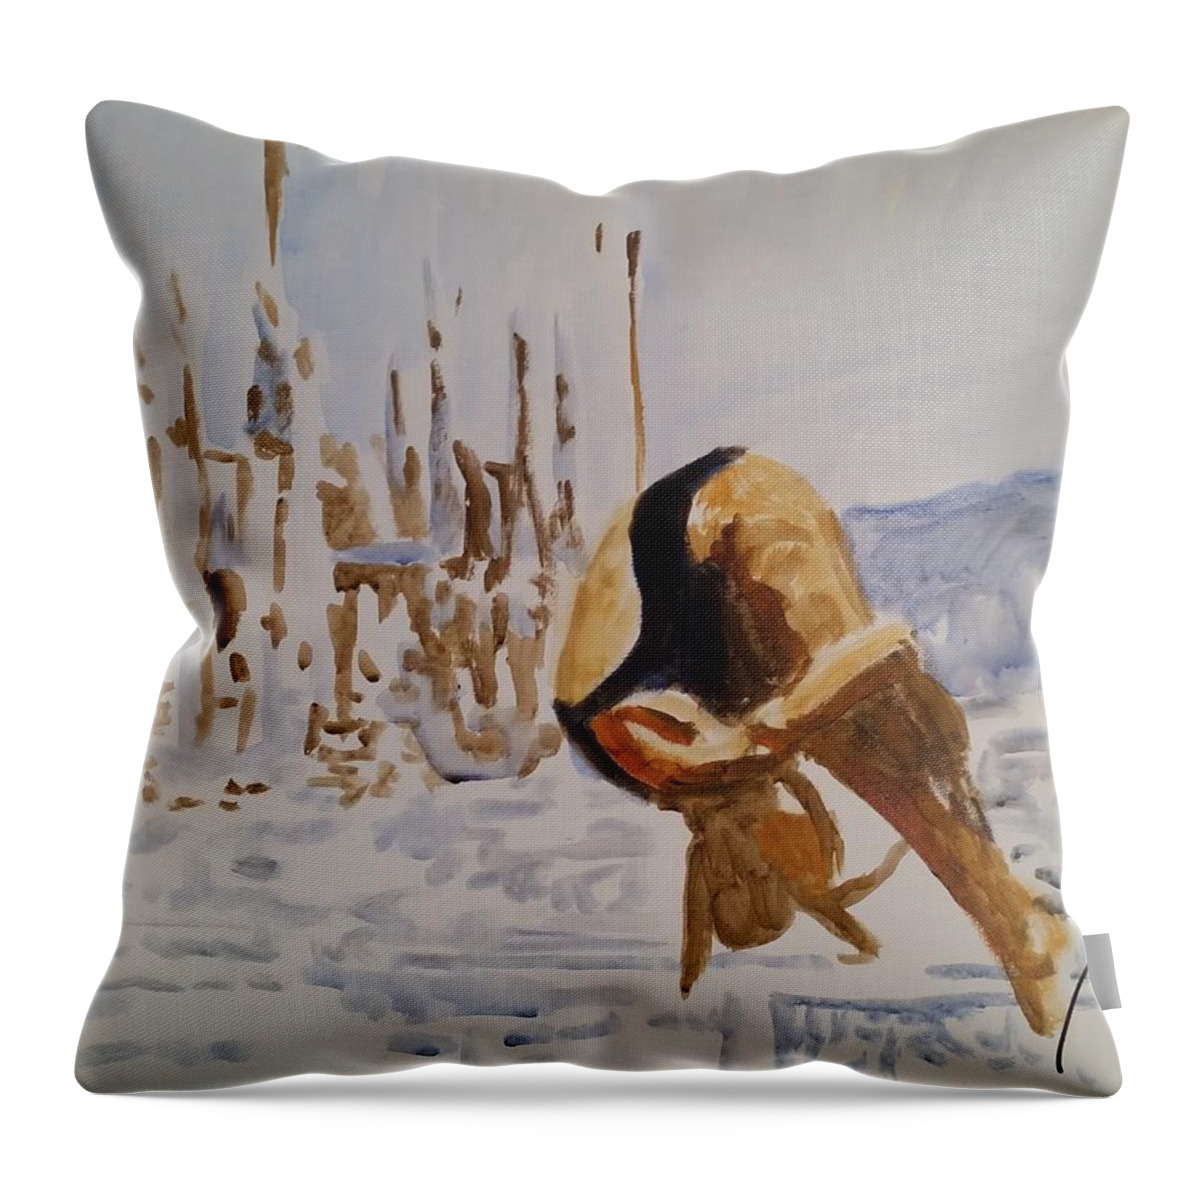 Platform Throw Pillow featuring the painting Diving I by Bachmors Artist